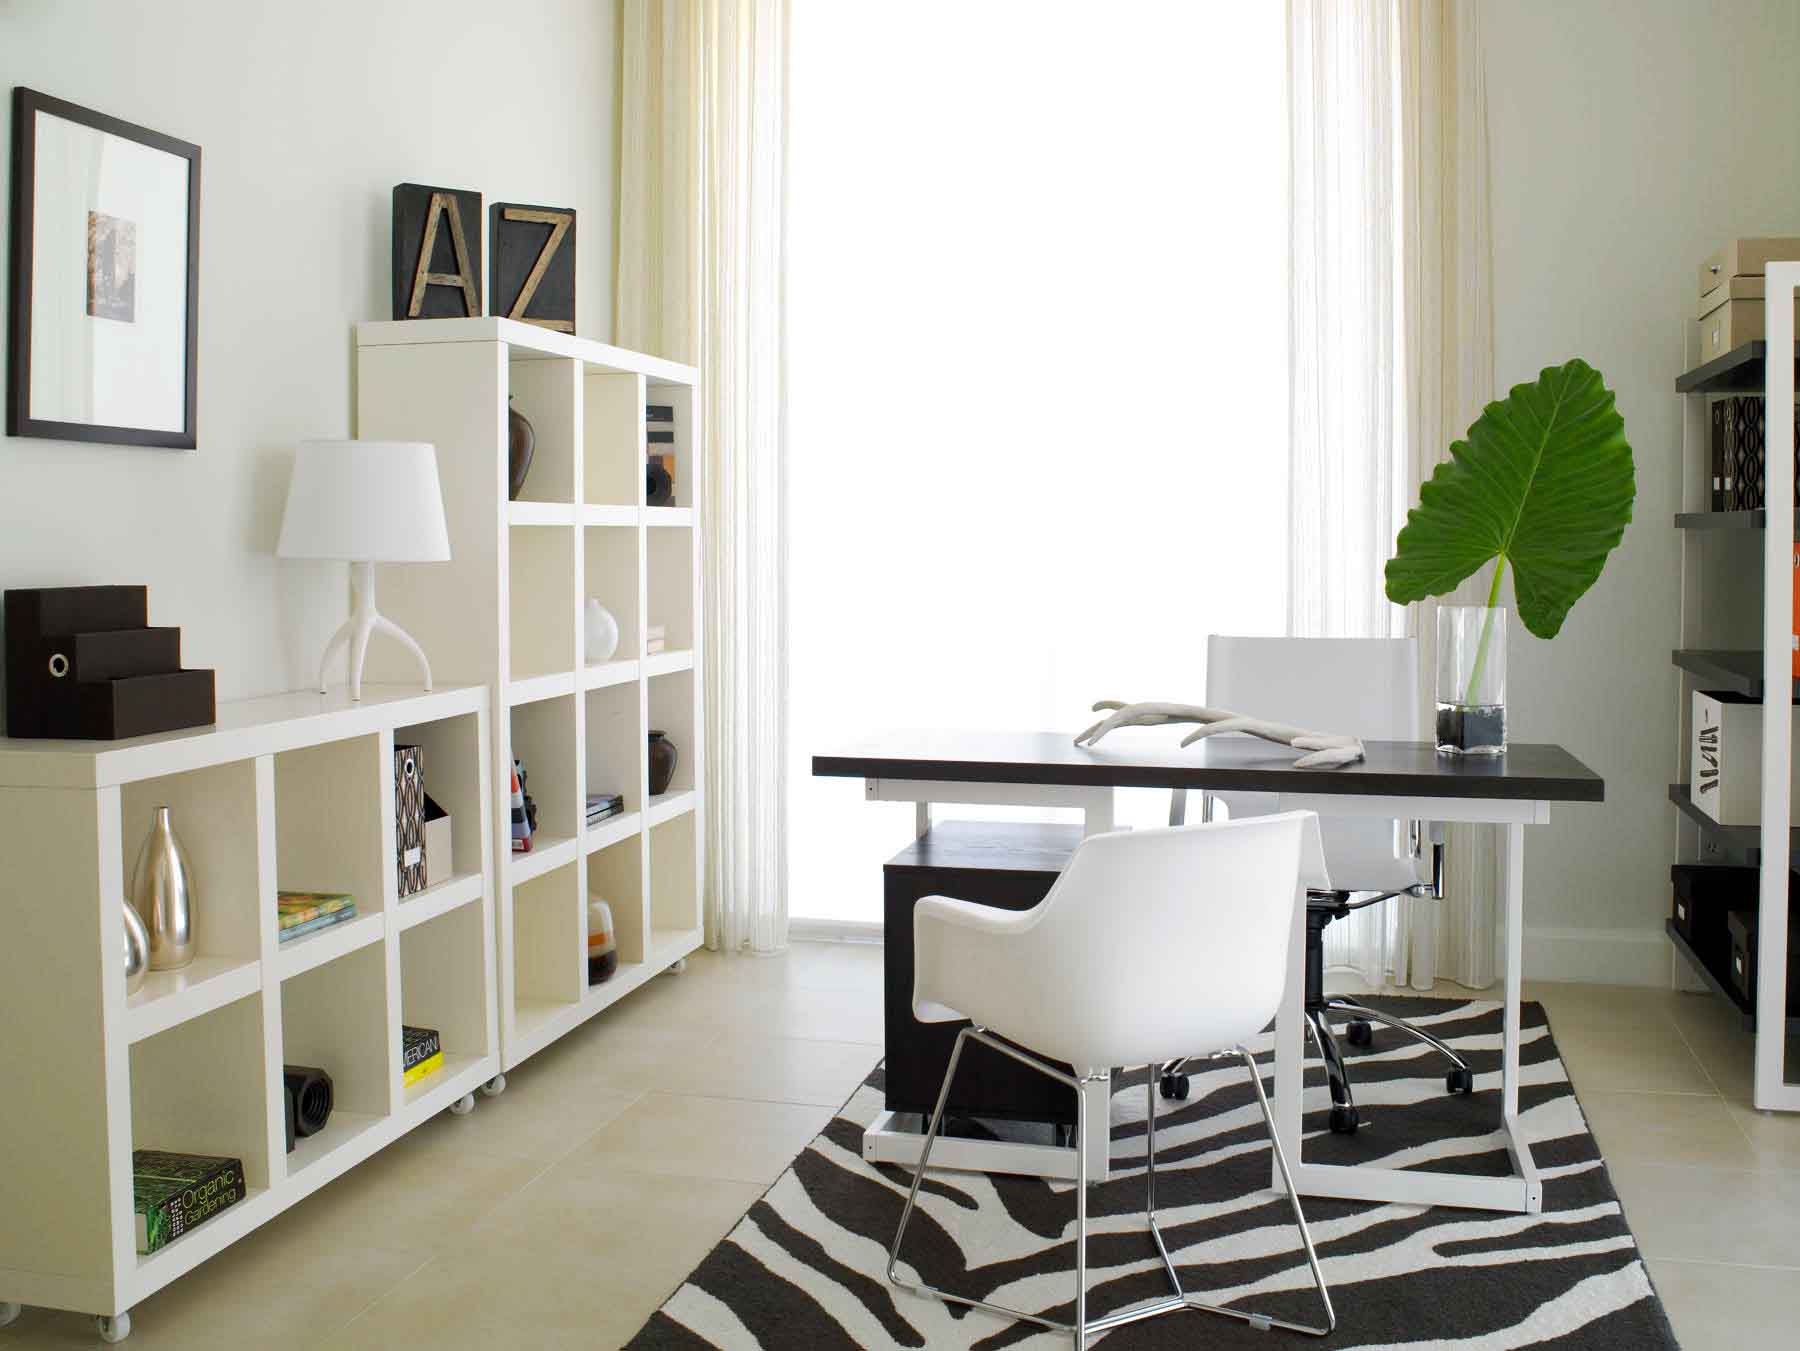 Modern Home By Topnotch Modern Home Office Furnished By Natty Shelving And Bright Seat On Stripped Carpet Office Modern Home Office To Play With Furniture And Lighting Fixtures